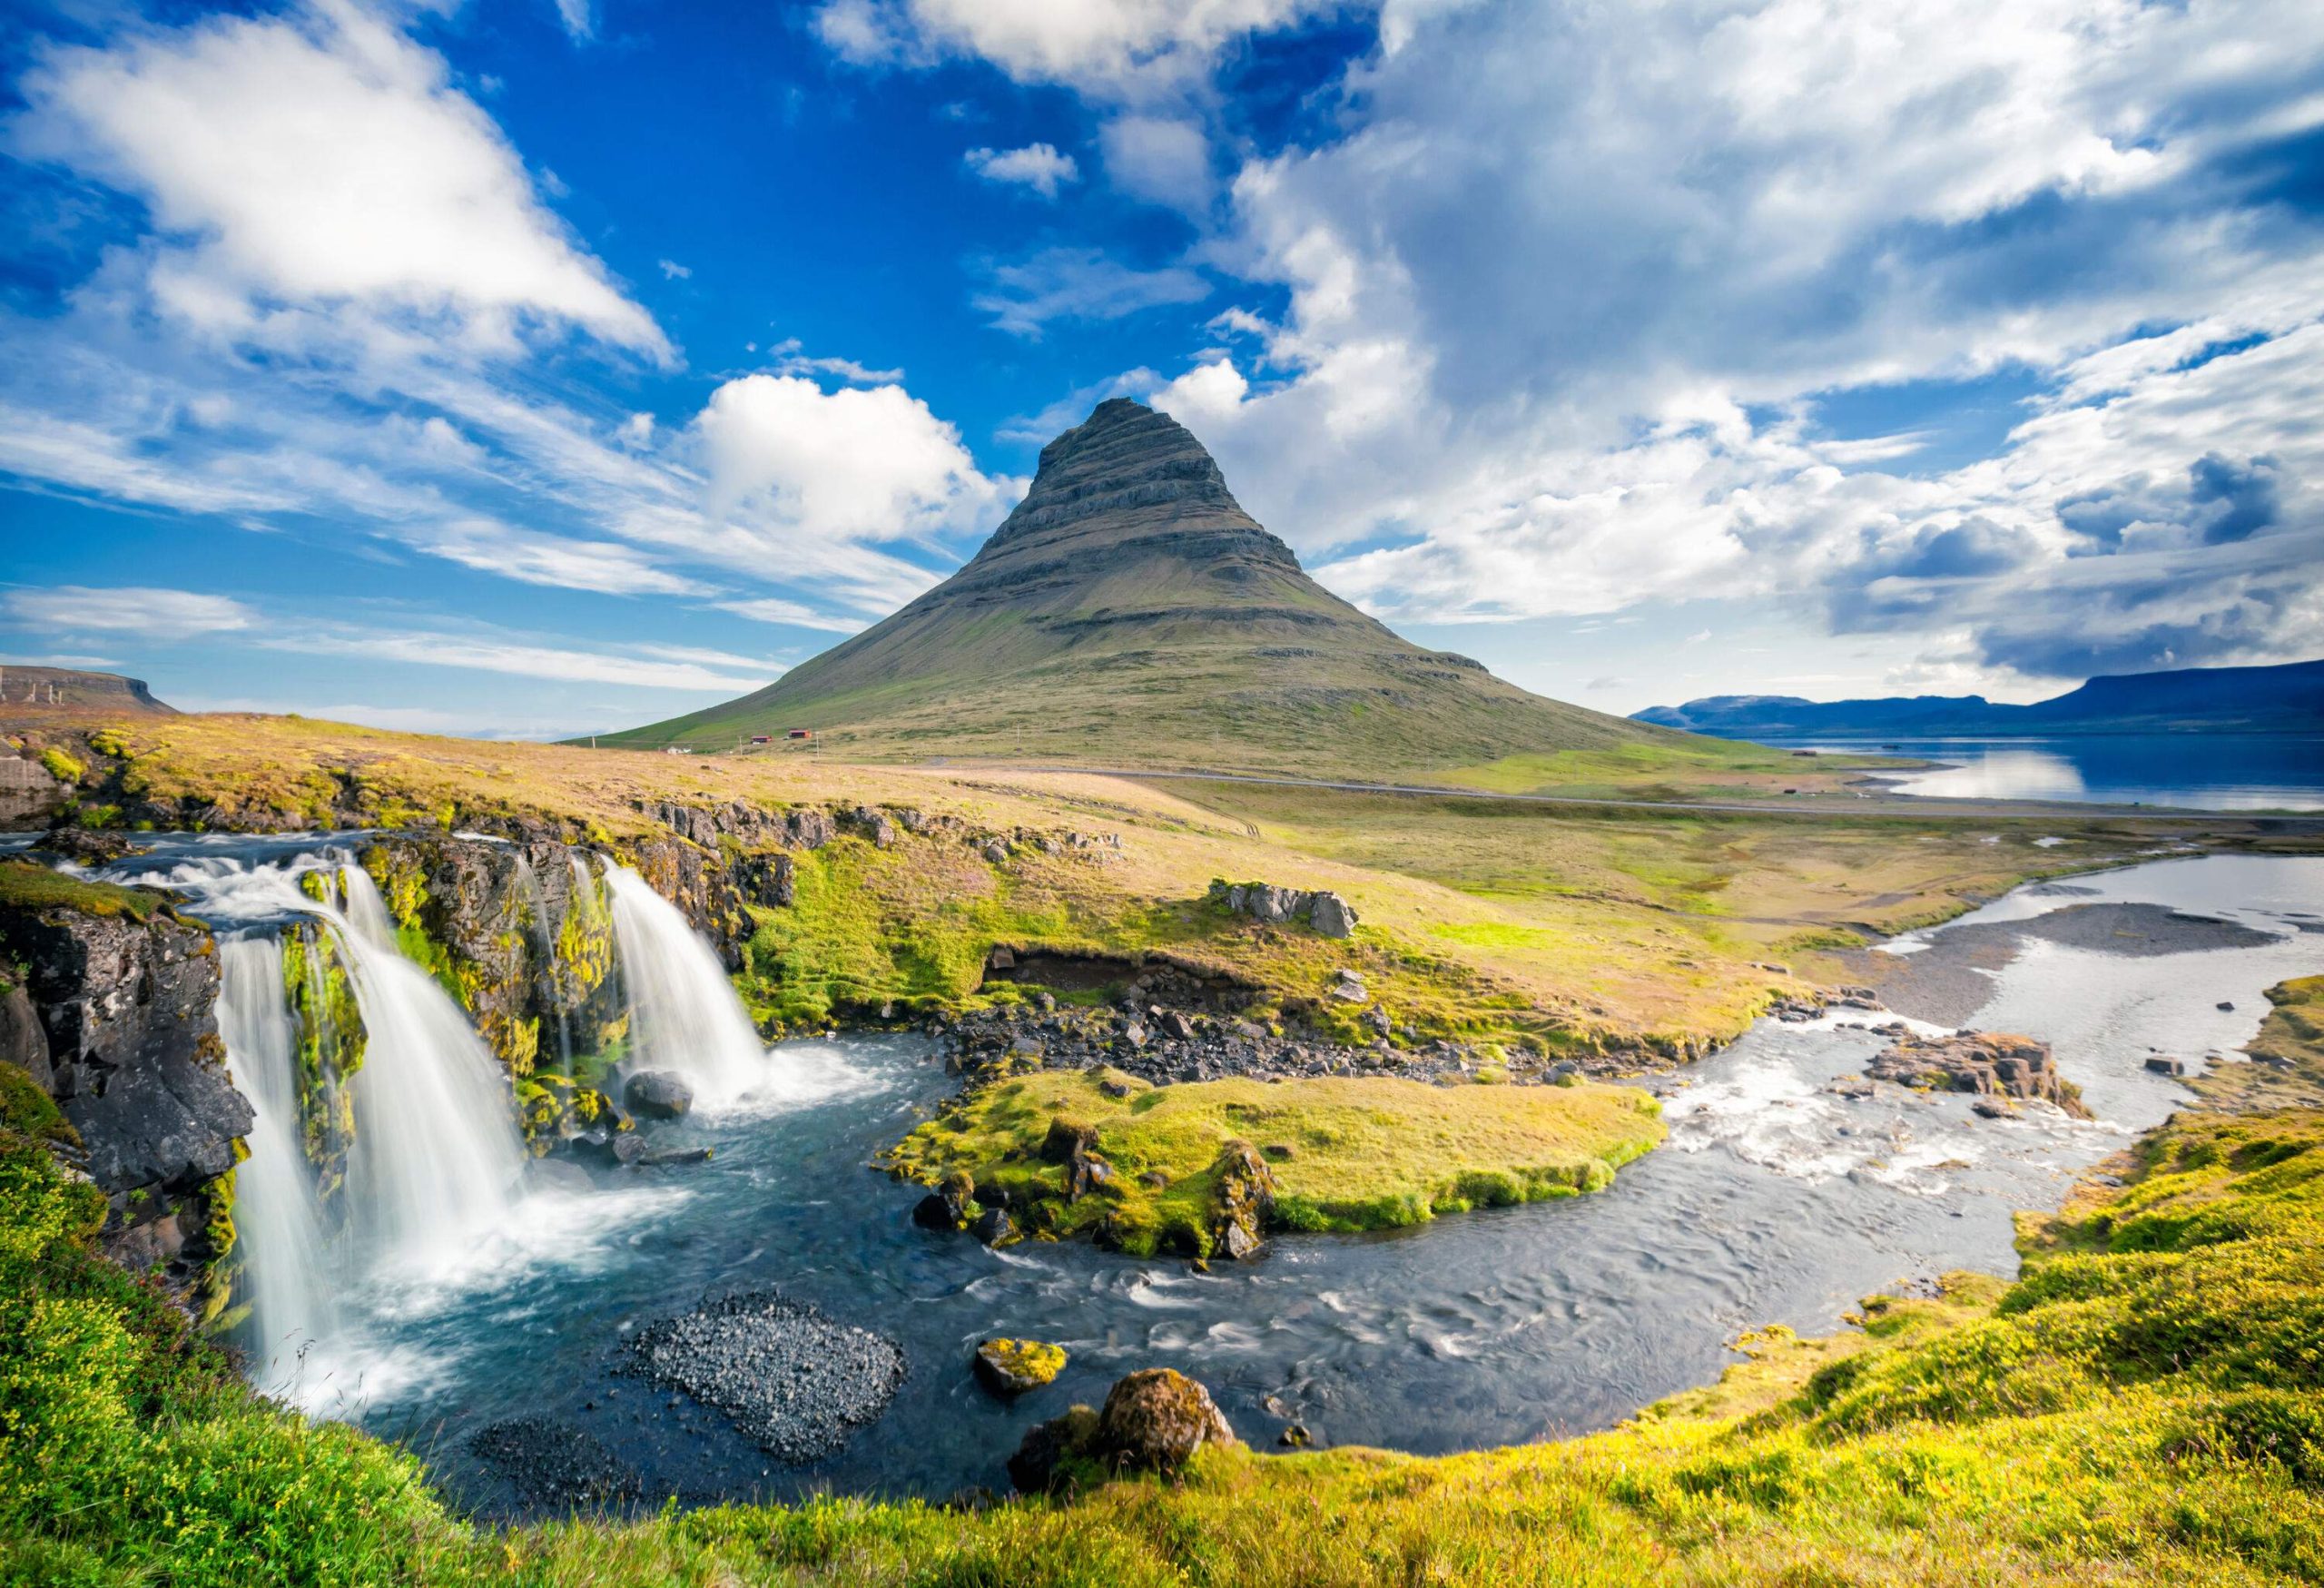 Mount Kirkjufell, a peak in the shape of an arrowhead, is surrounded by a beautiful green environment and a waterfall that runs into the river.